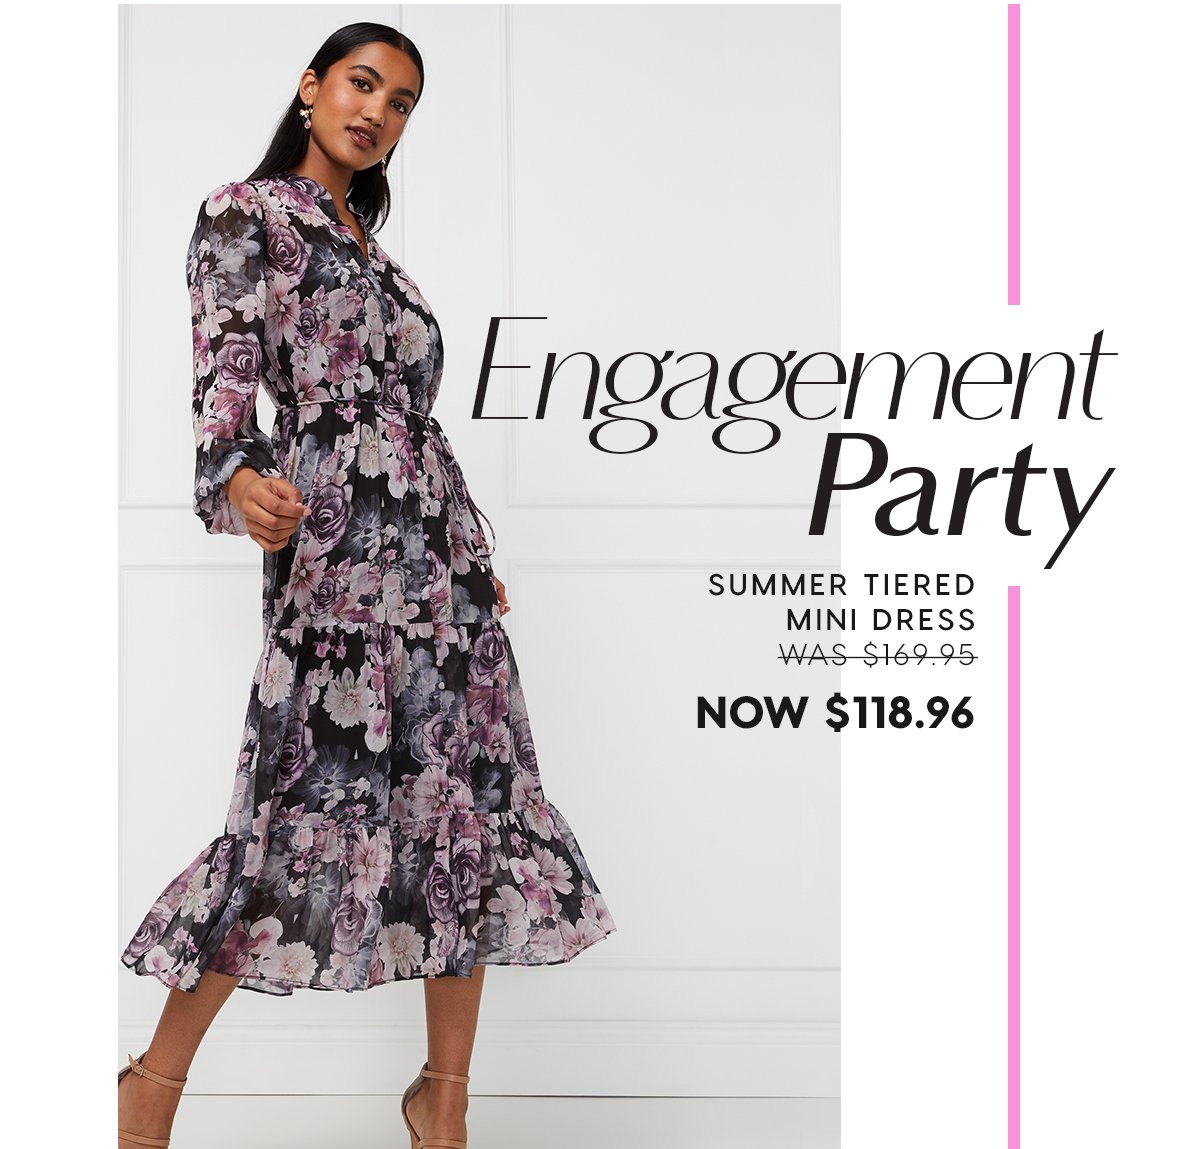 Engagement Party | Summer Tiered Mini Dress WAS $169.95 NOW $118.96